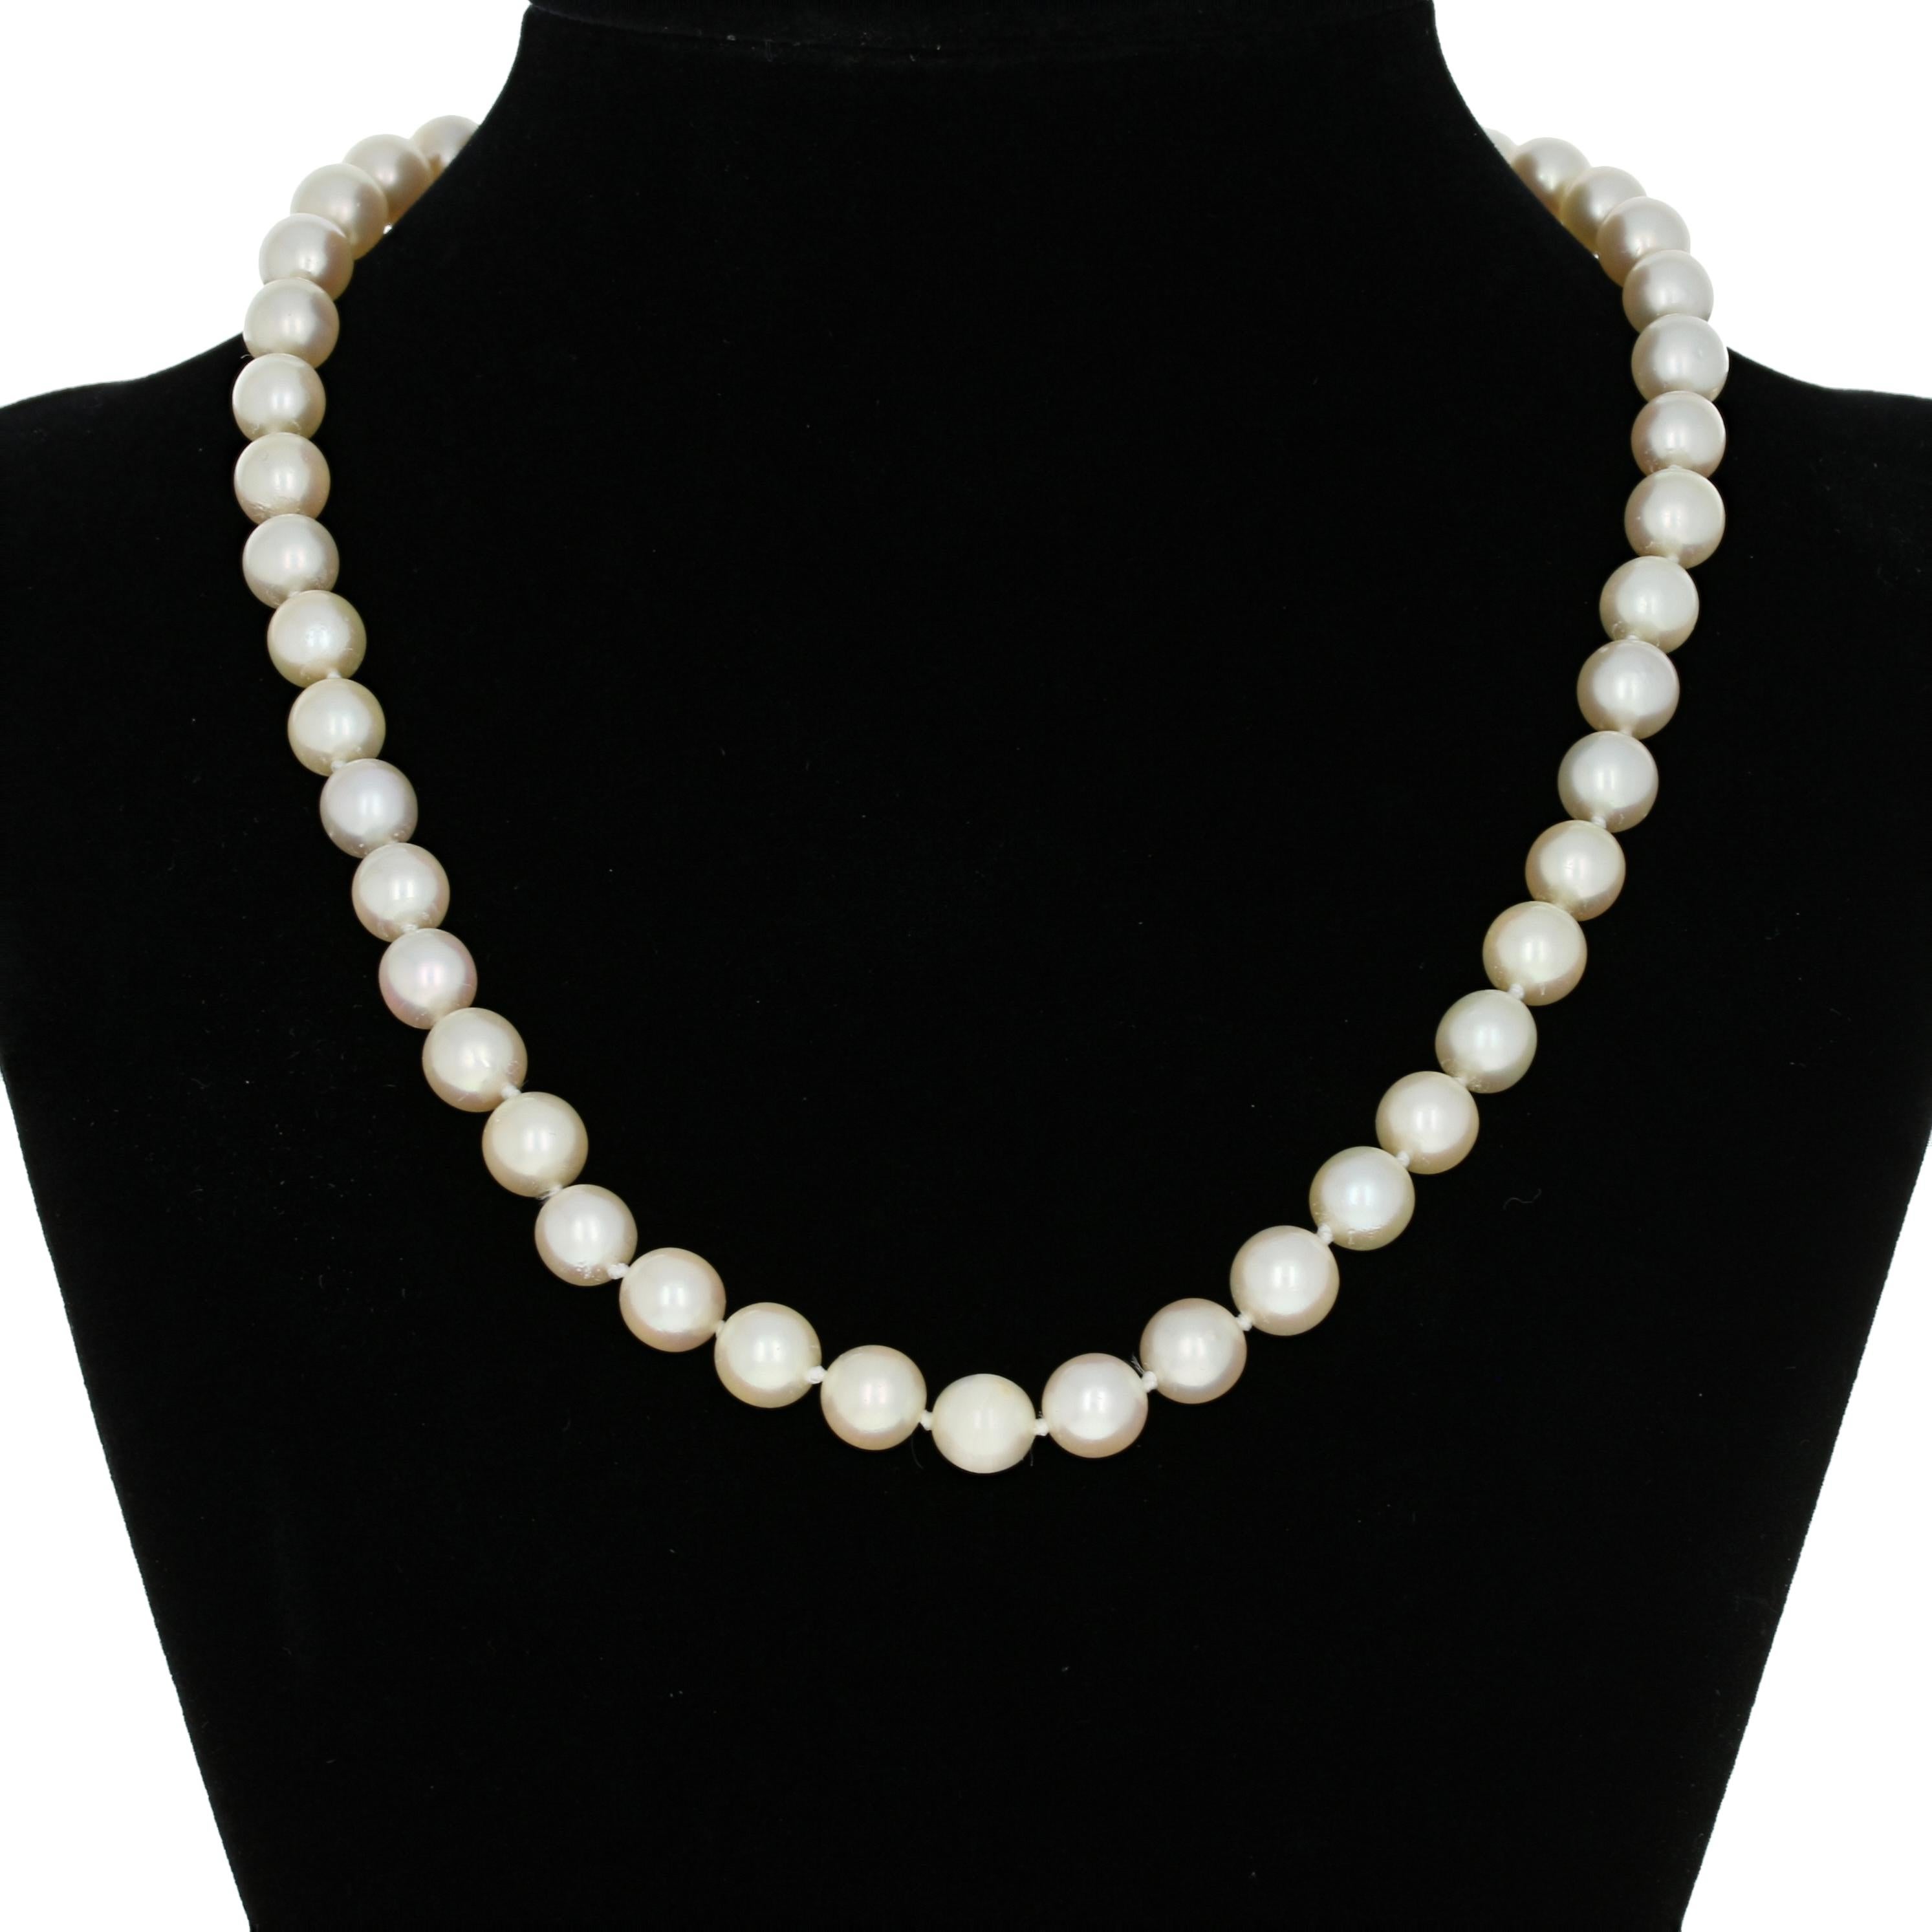 Metal Content: Guaranteed 14k Gold as stamped

Stone Information:
Cultured Pearls 
Diameters: 7.2mm - 7.6mm 

Necklace Style: Knotted Strand
Measurements: length 16